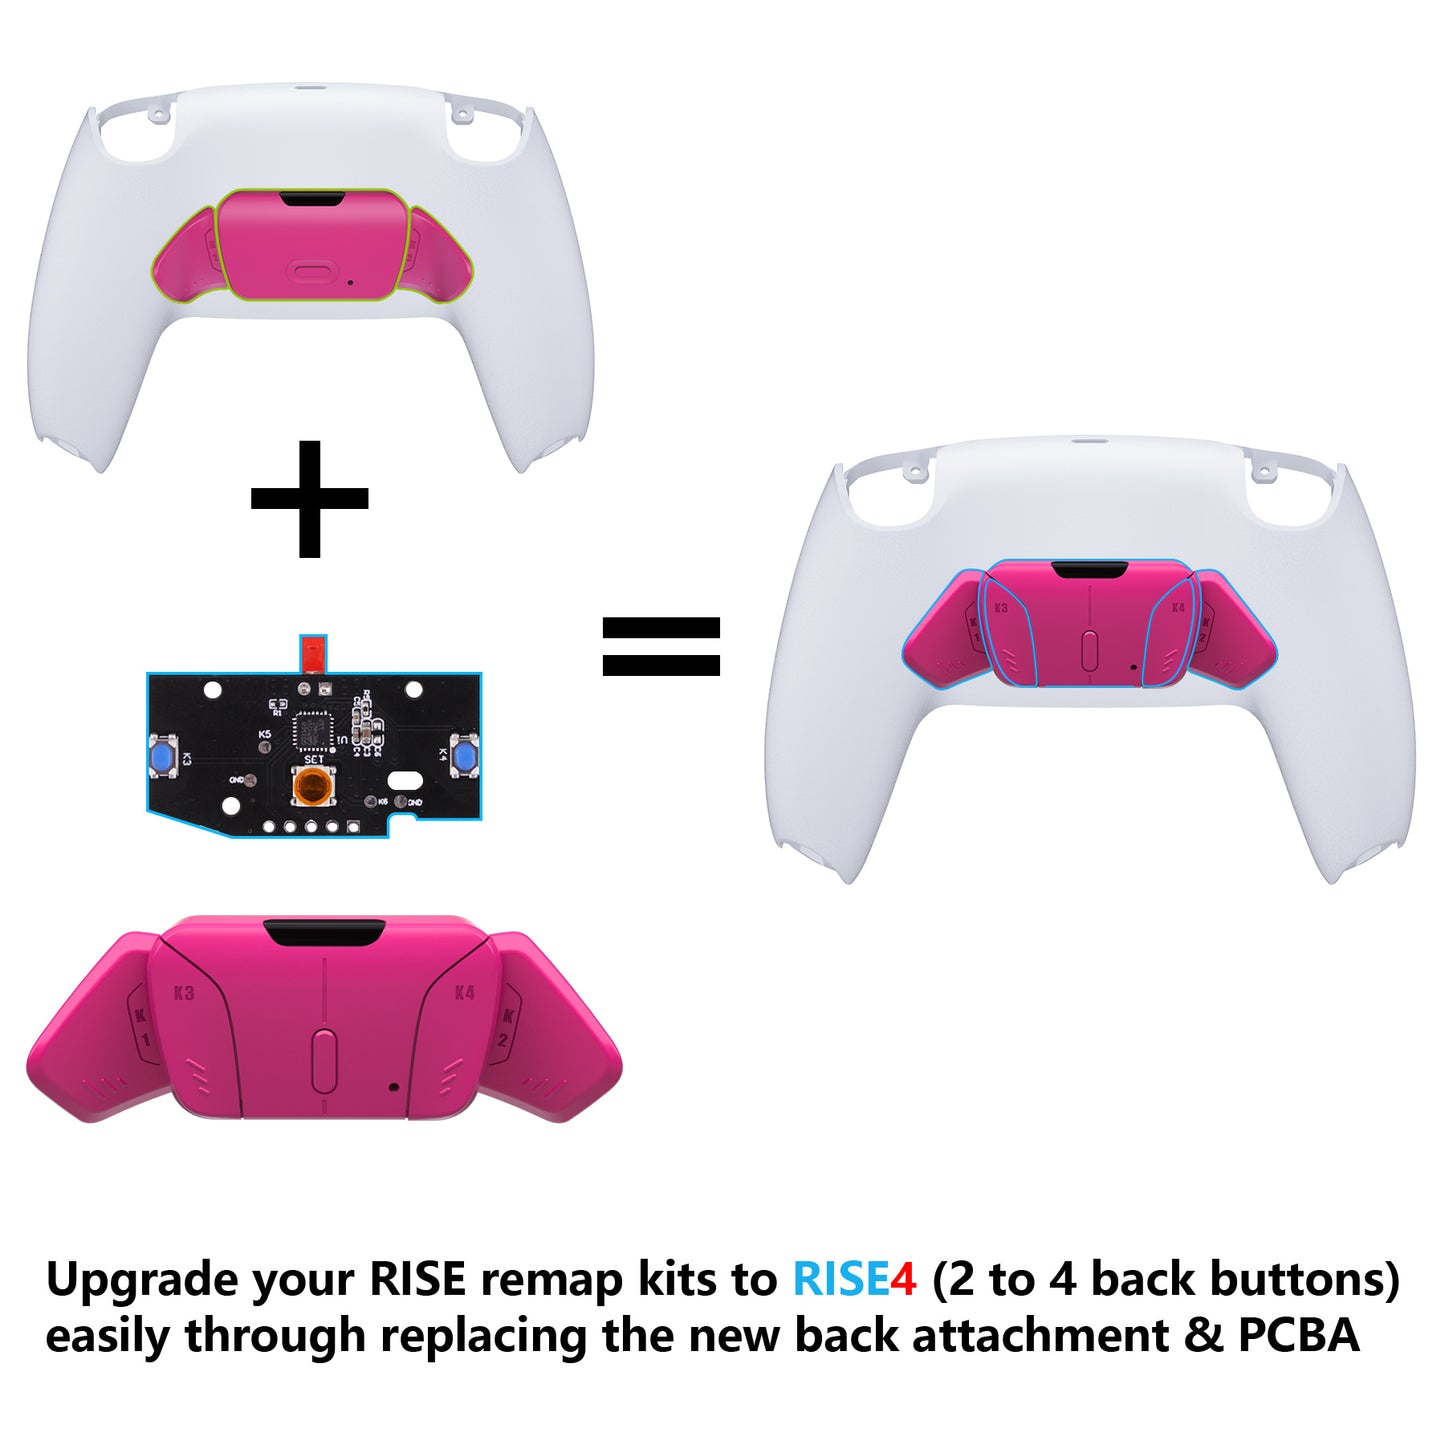 eXtremeRate Retail Turn RISE to RISE4 Kit – Redesigned Nova Pink K1 K2 K3 K4 Back Buttons Housing & Remap PCB Board for PS5 Controller eXtremeRate RISE & RISE4 Remap kit - Controller & Other RISE Accessories NOT Included - VPFM5008P